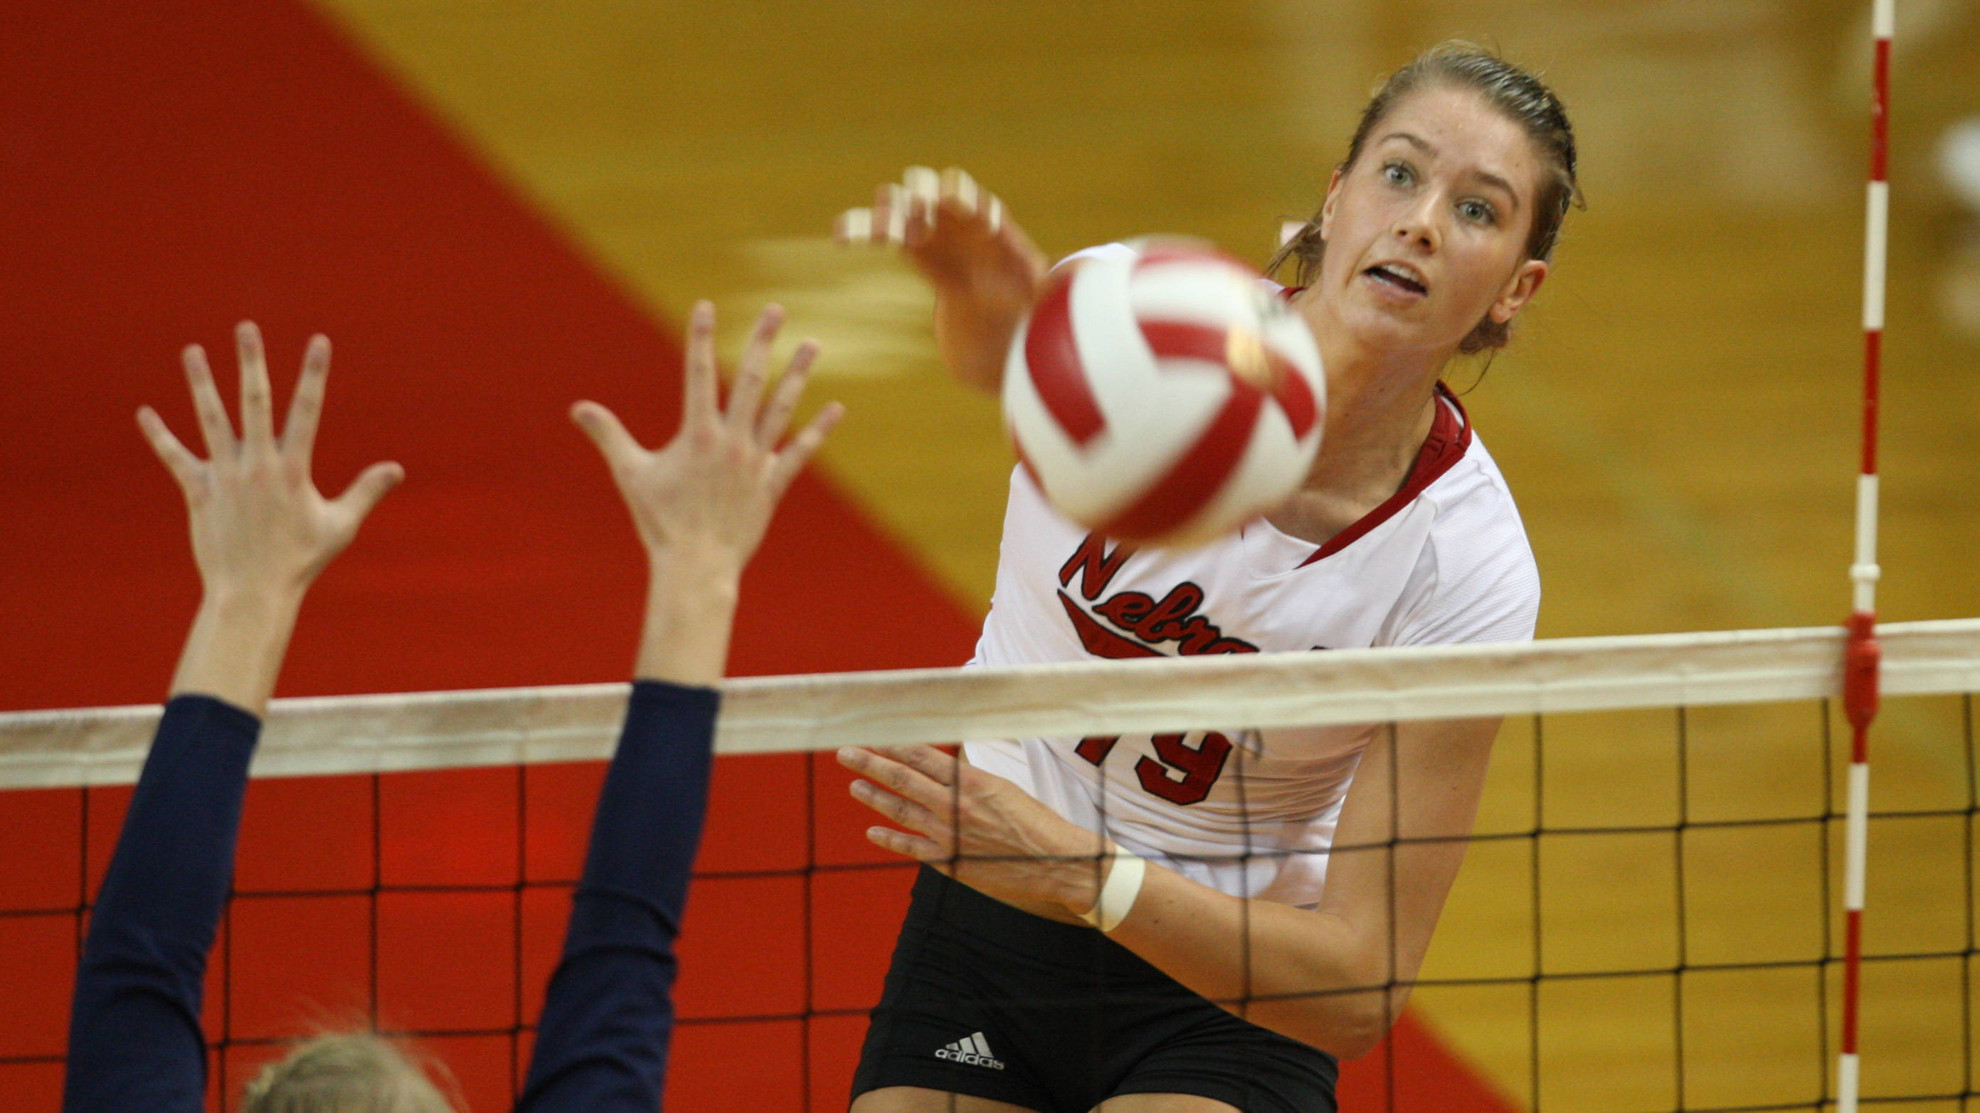 husker volleyball live stream free